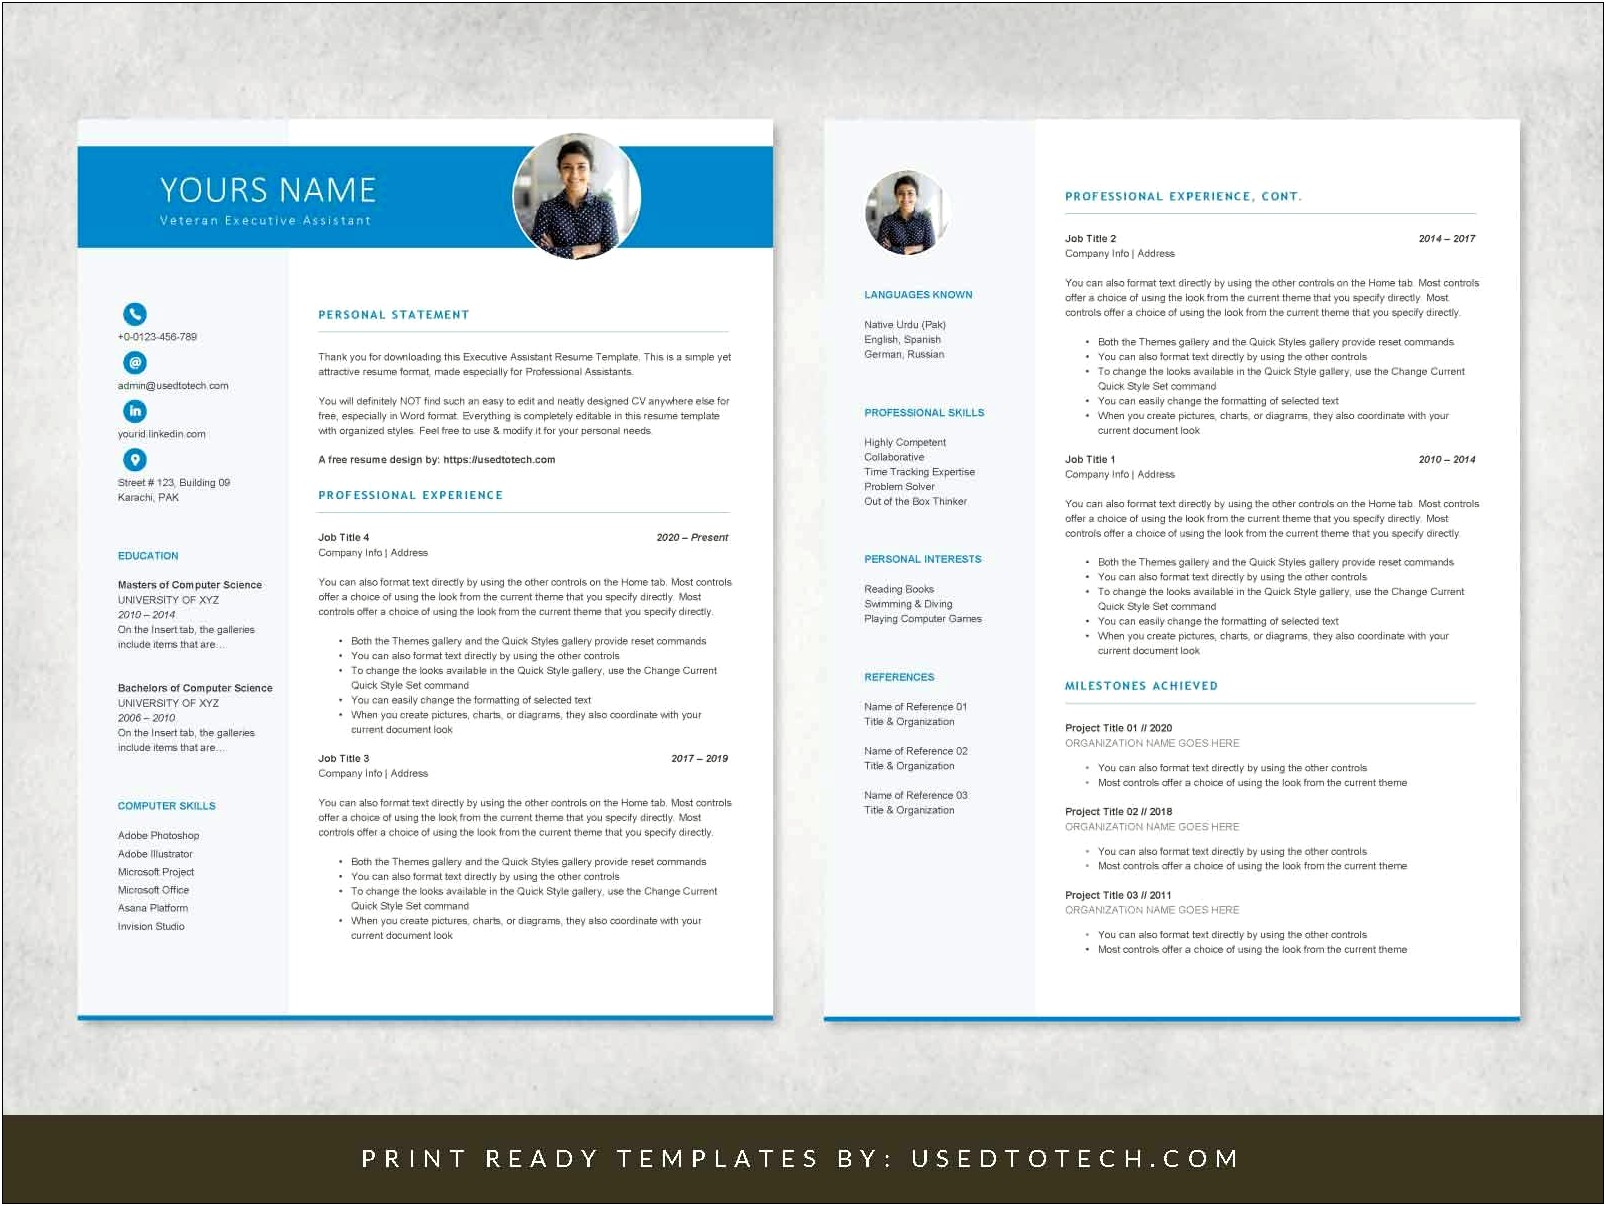 Free Administrative Assistant Resume Template Microsoft Word